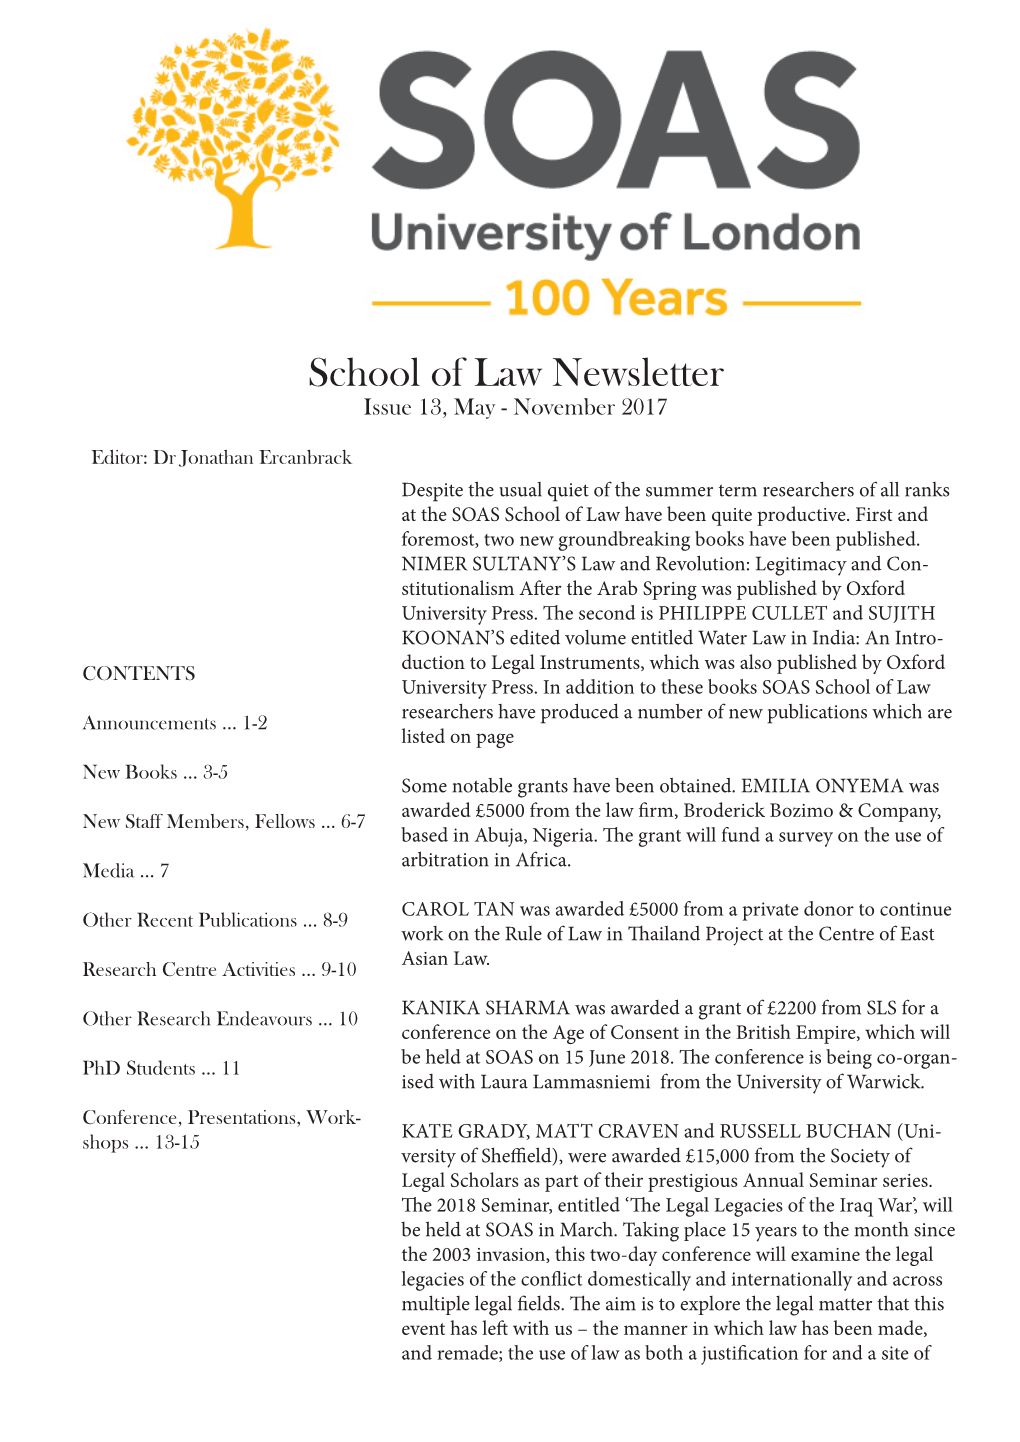 School of Law Newsletter Issue 13, May - November 2017